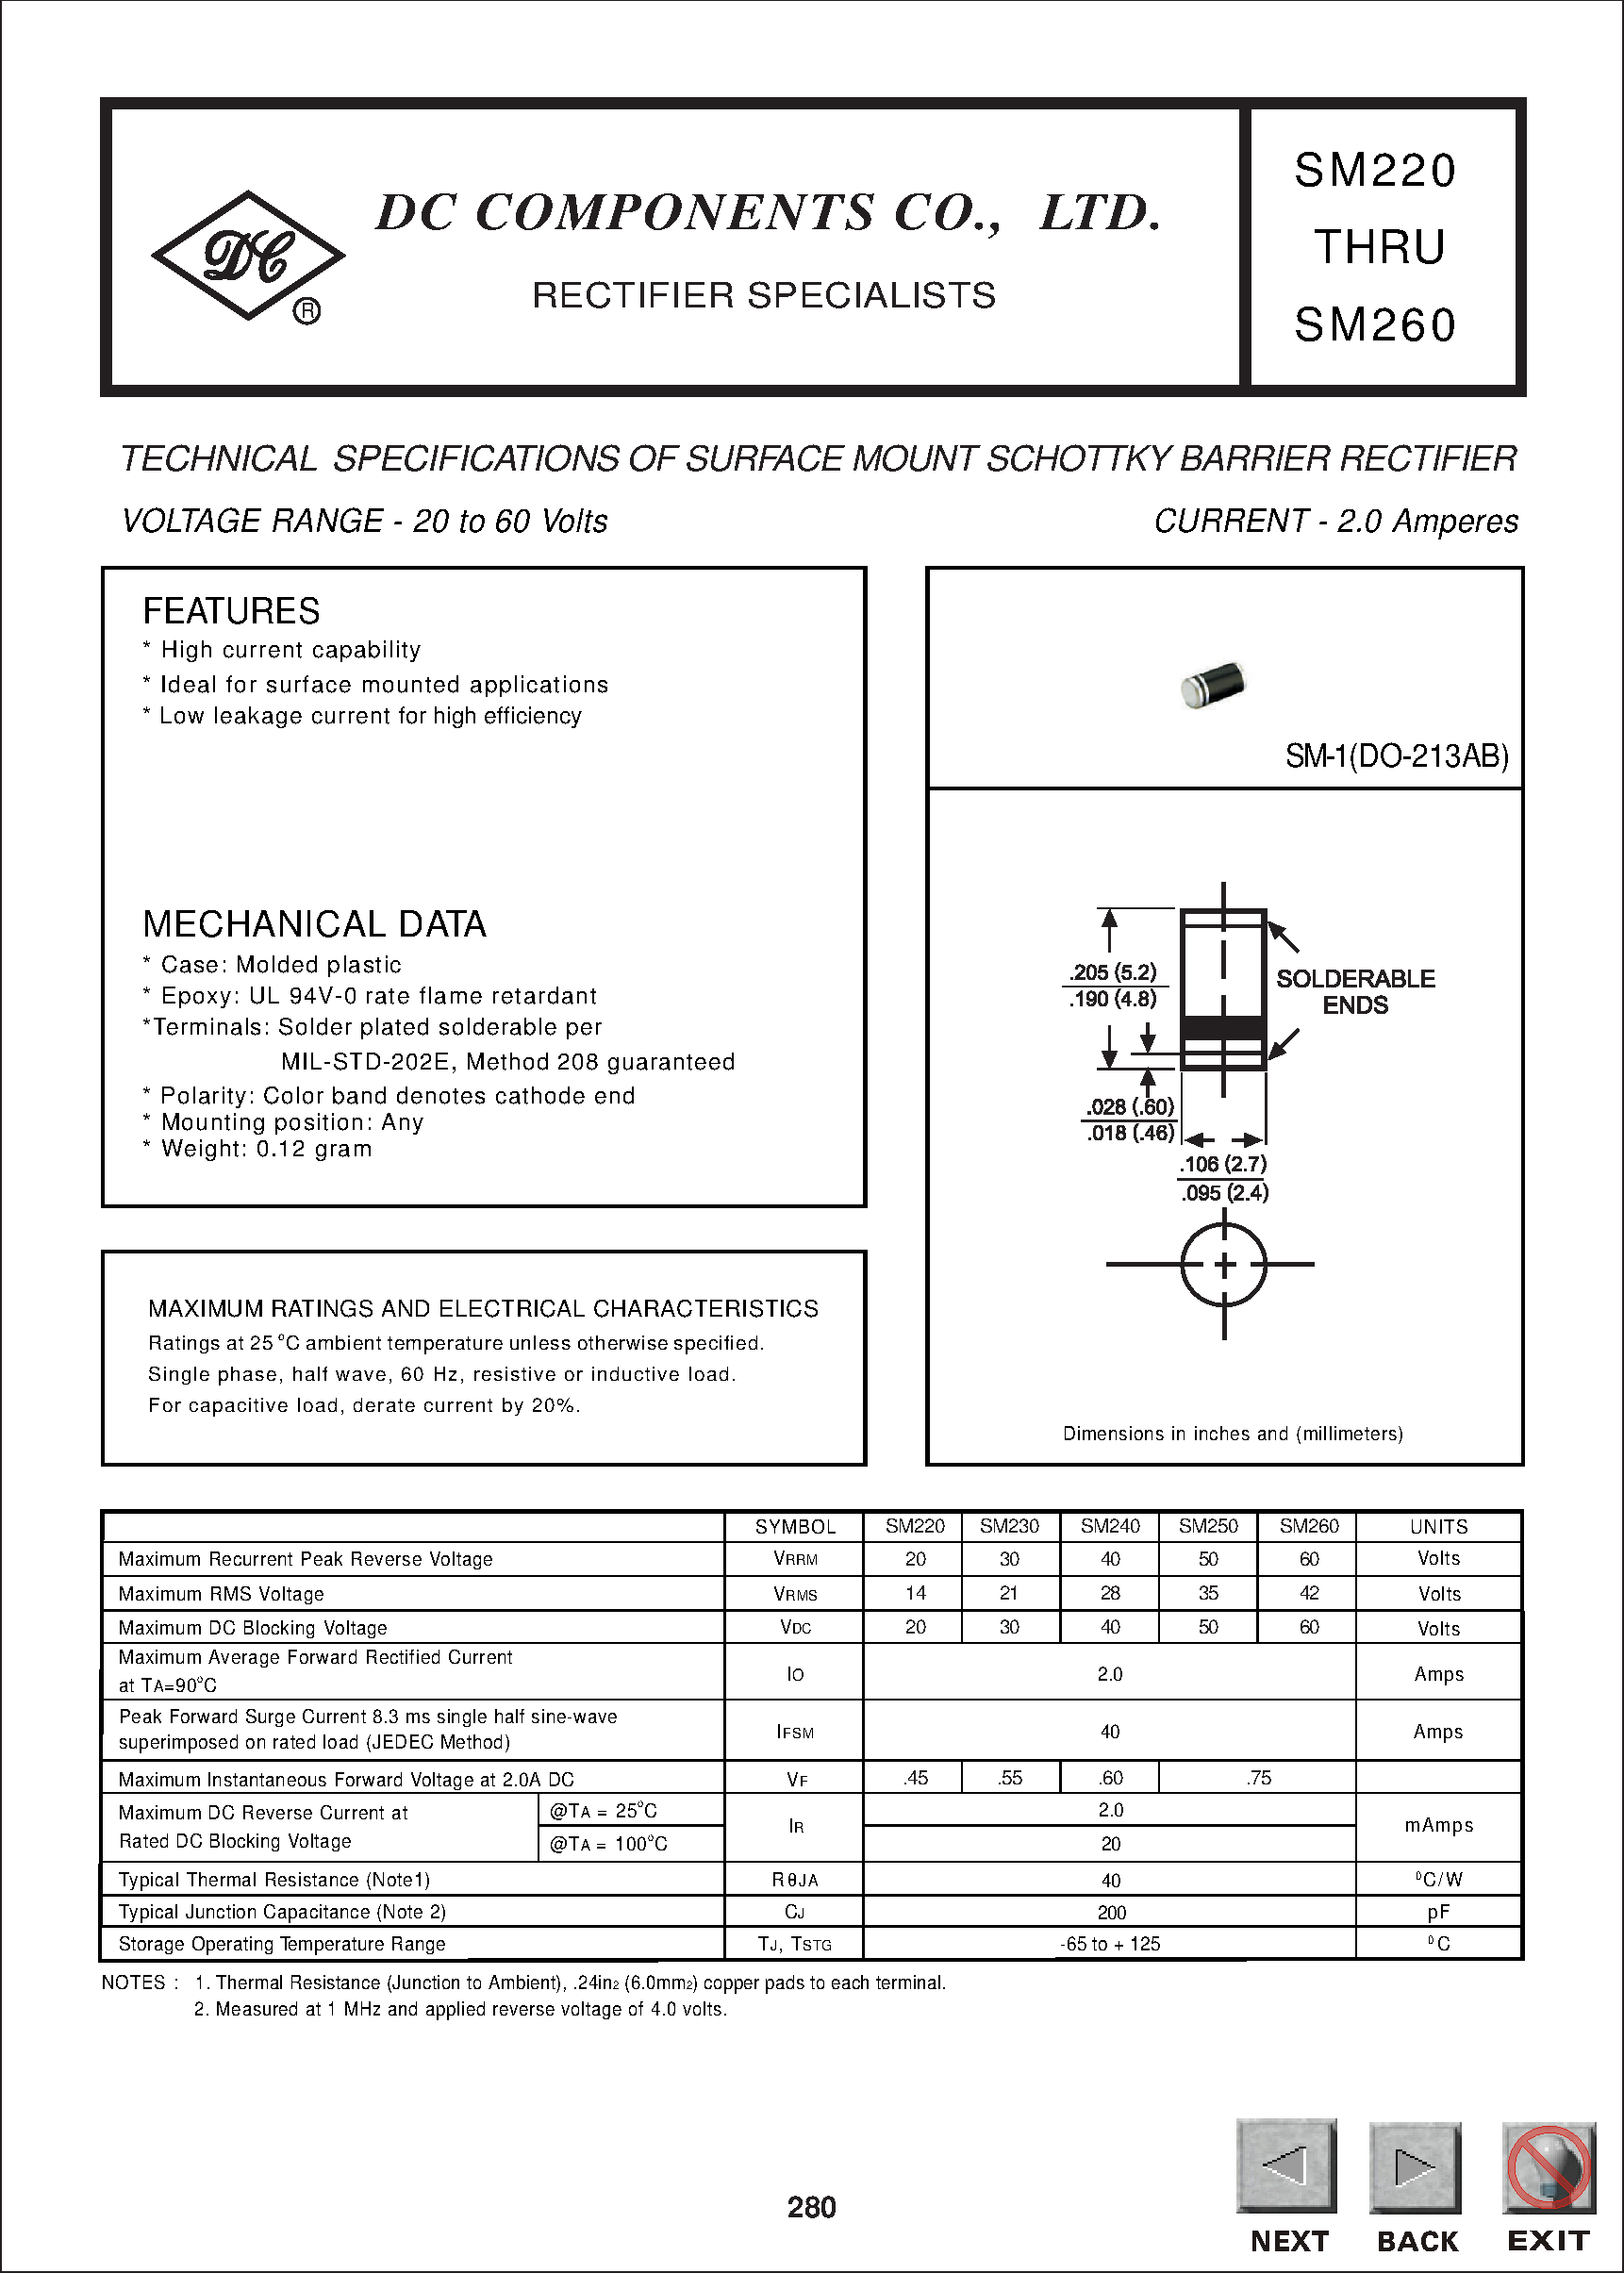 Datasheet SM240 - TECHNICAL SPECIFICATIONS OF SURFACE MOUNT SCHOTTKY BARRIER RECTIFIER page 1